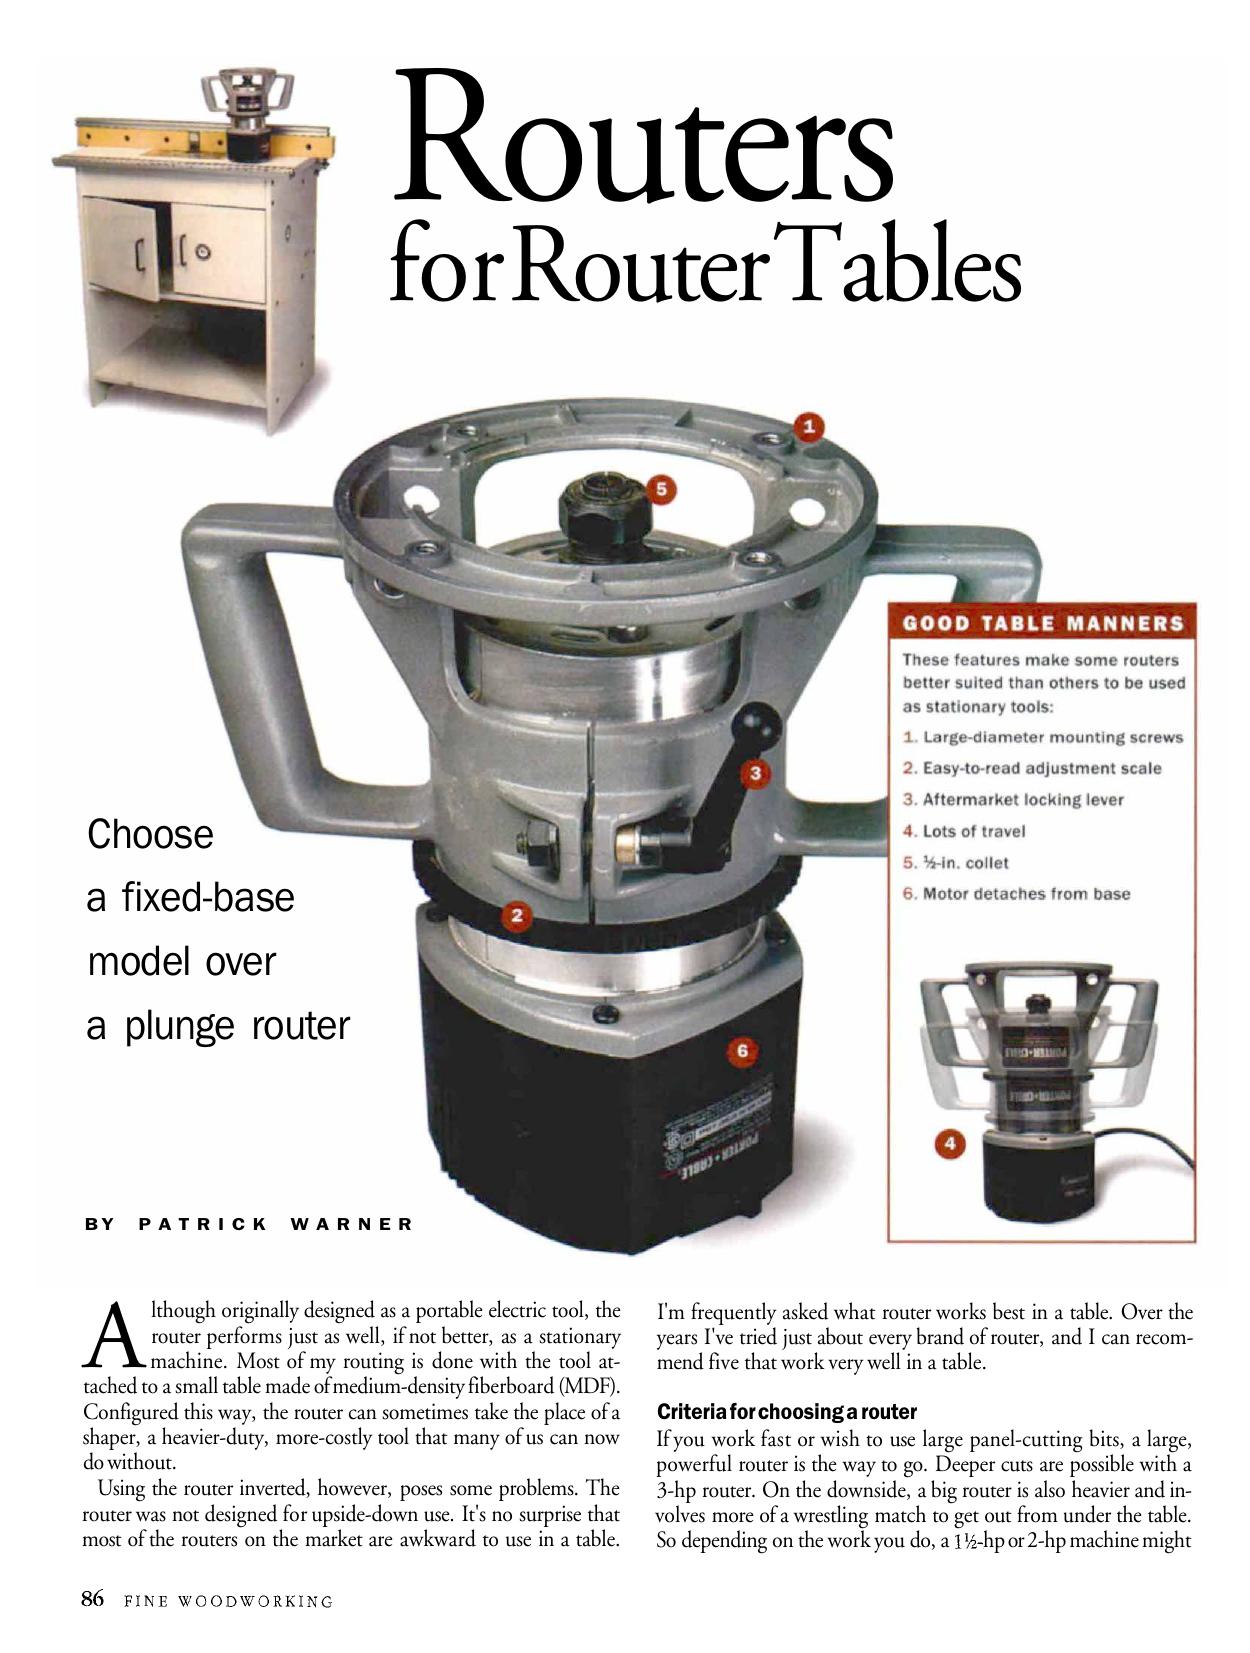 Routers for Router Tables by Patrick Warner